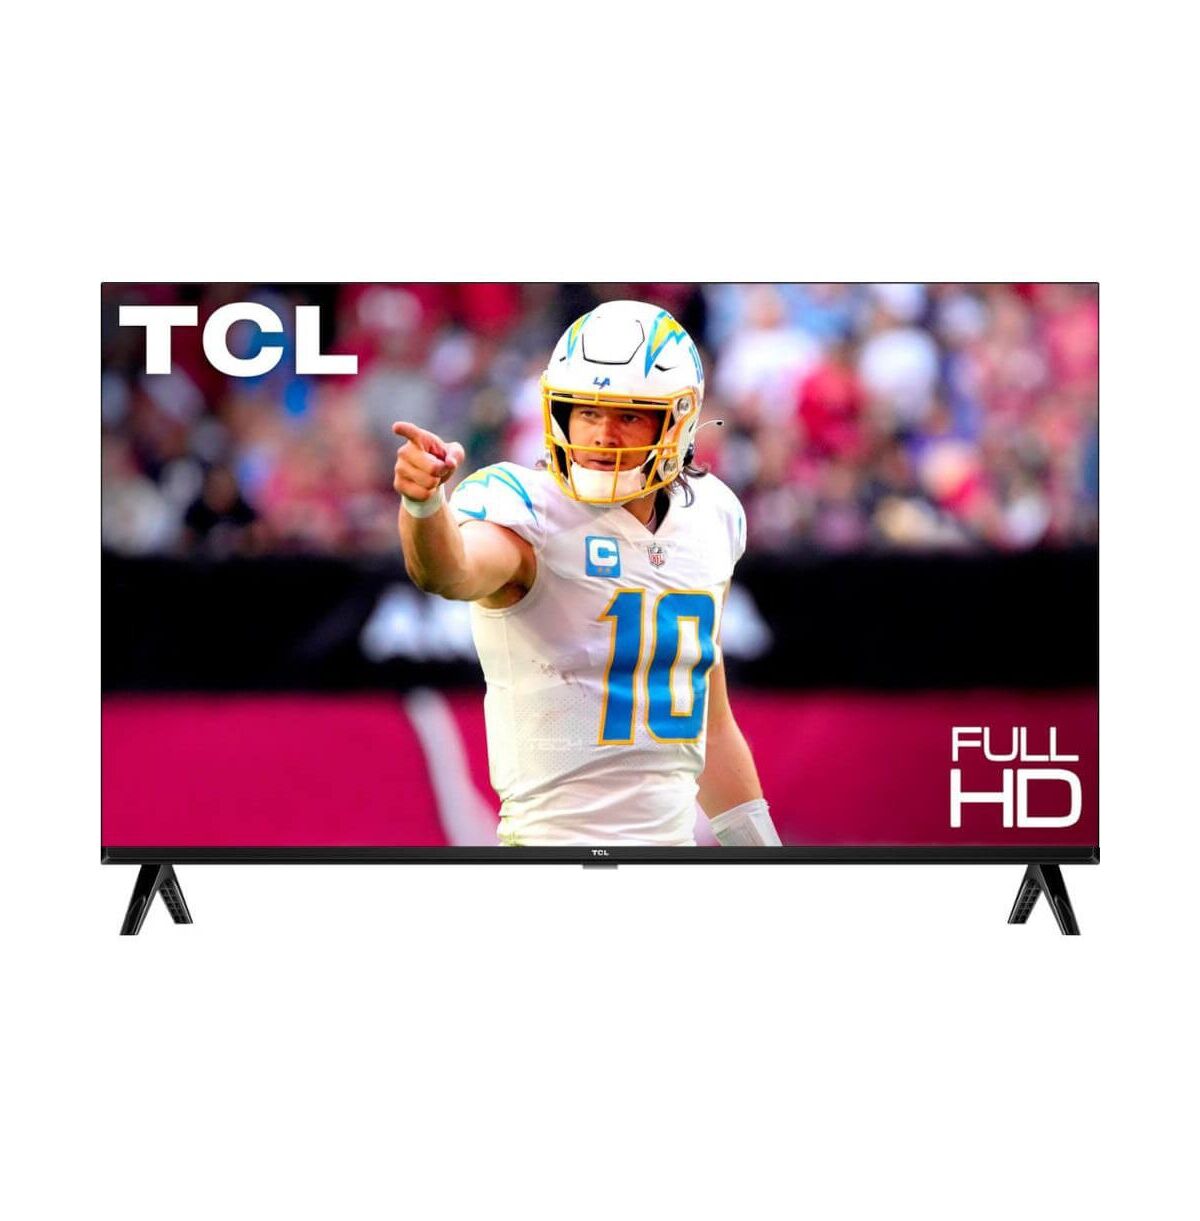 TCL 40 inch Class S3 1080p Led Hdr Smart Tv - Black